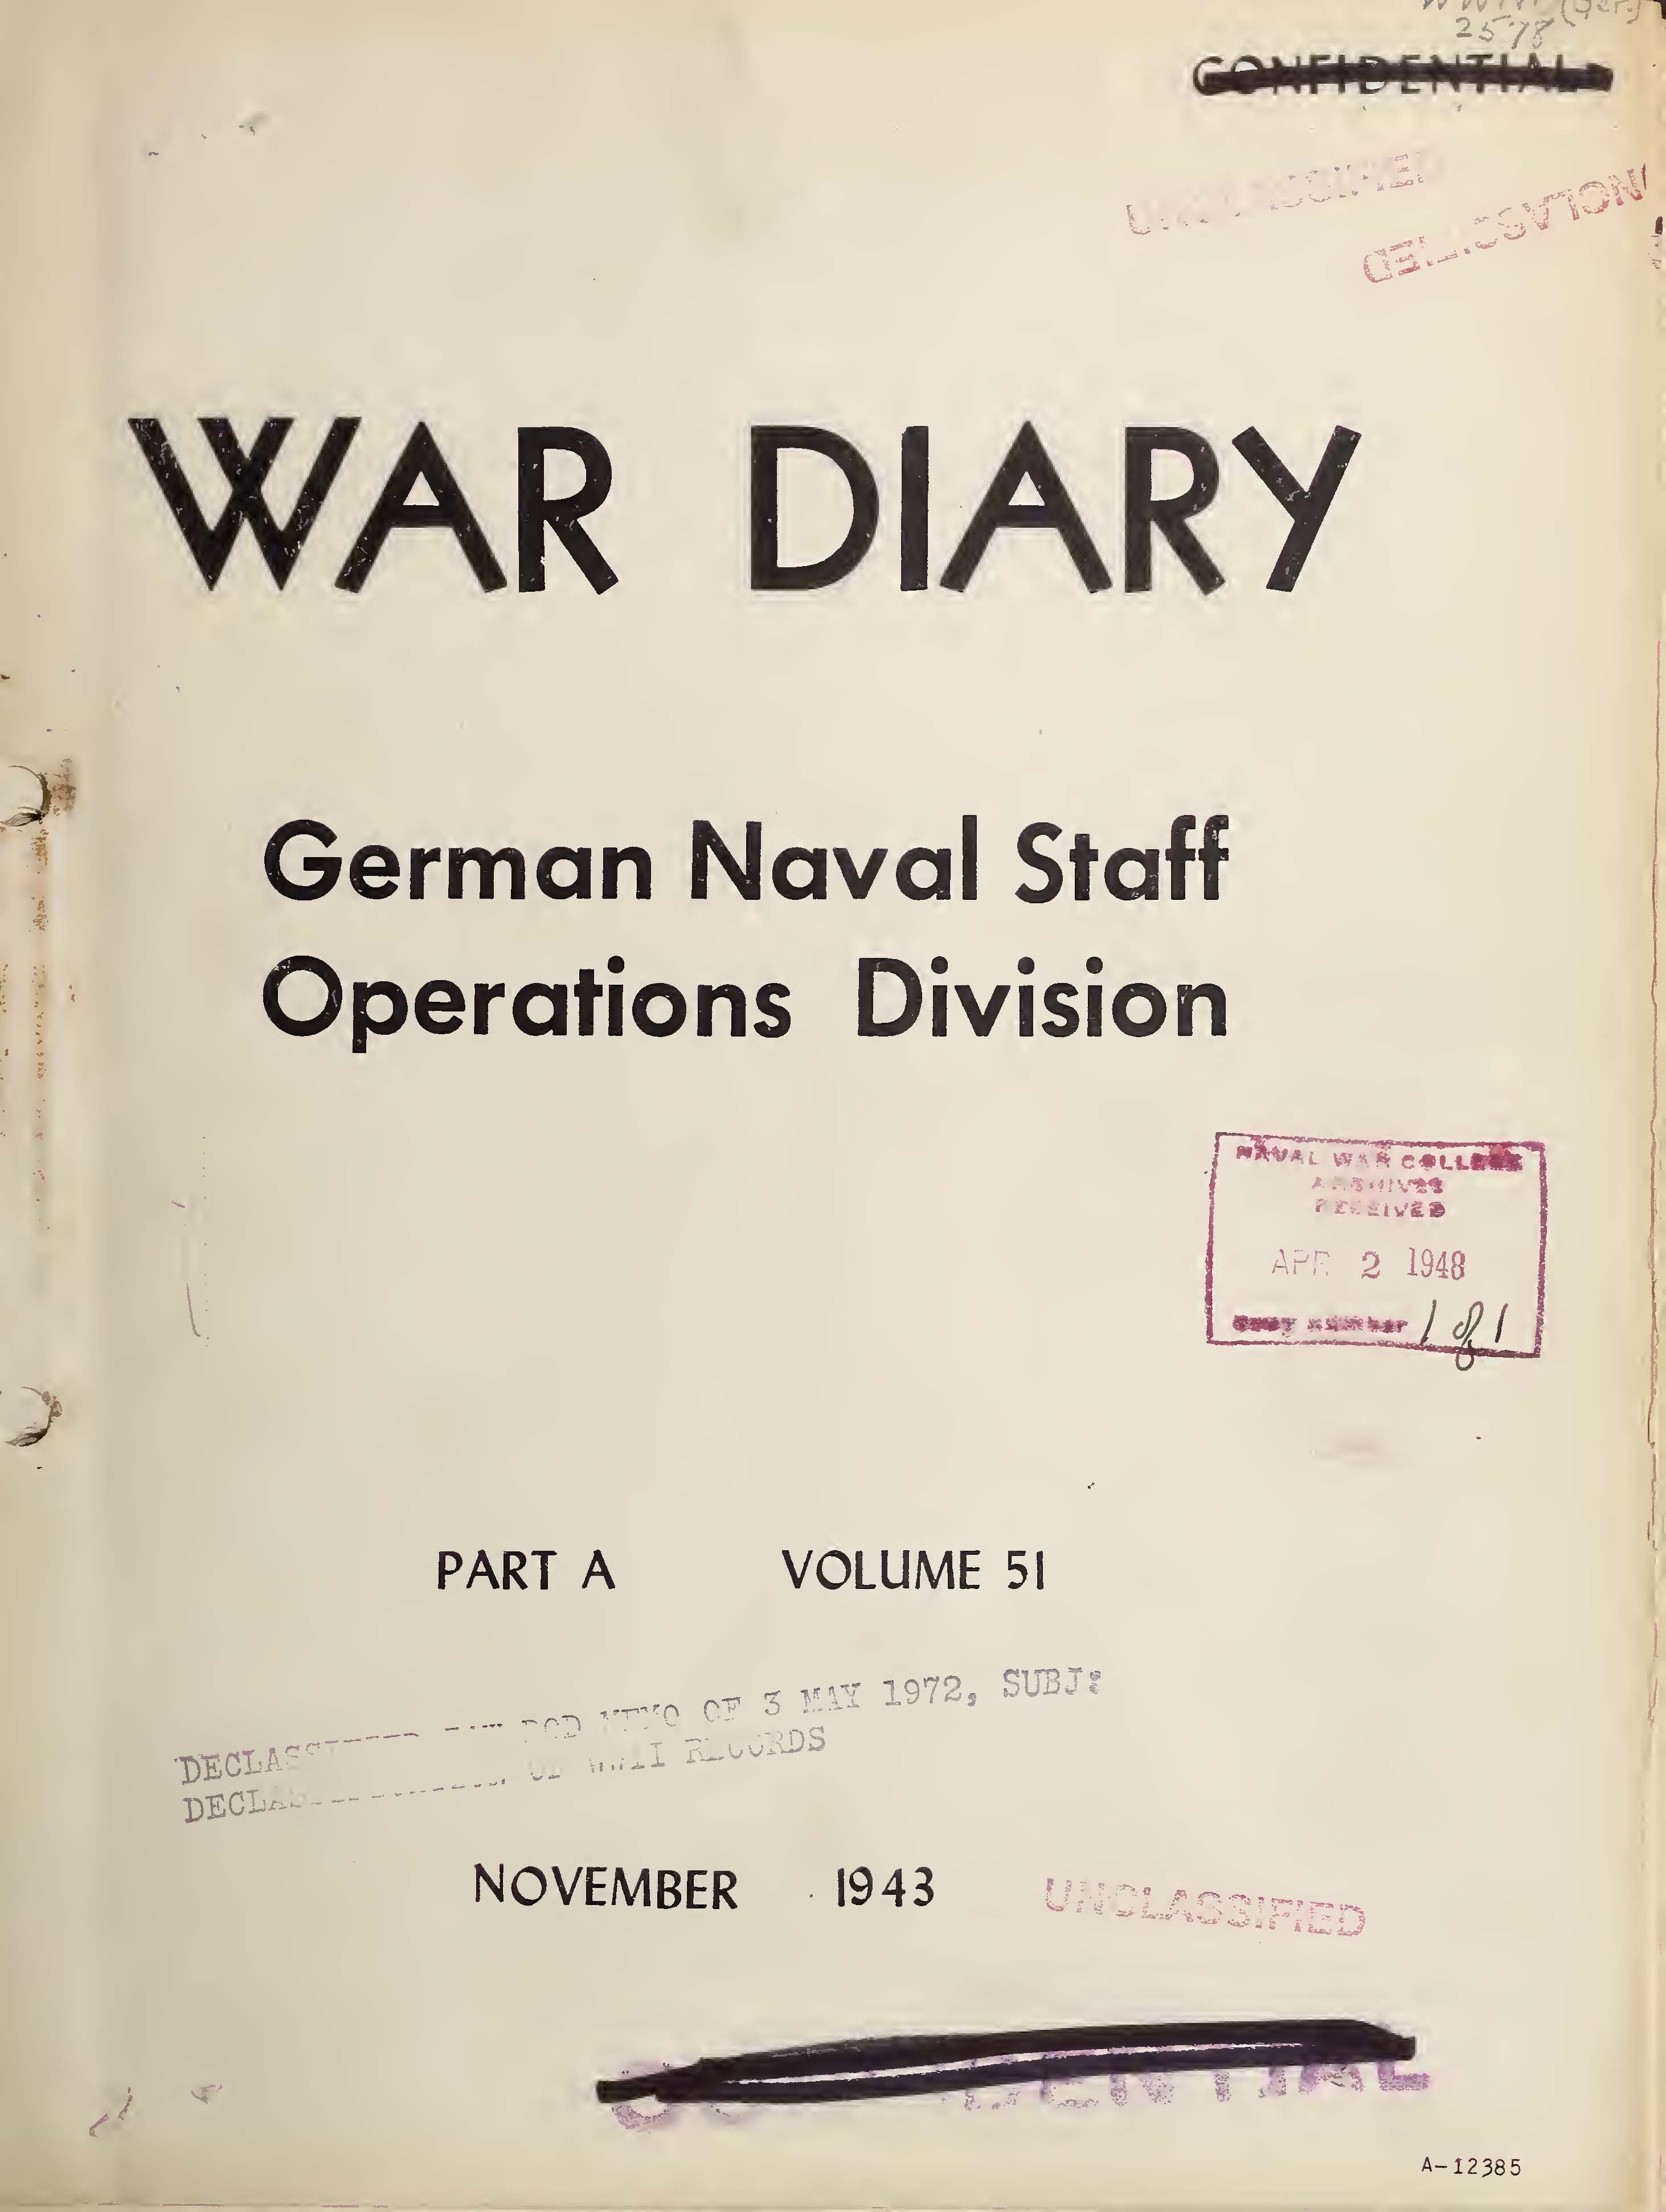 War Diary of German Naval Staff (Operations Division) Part A, Volume 51, November 1943